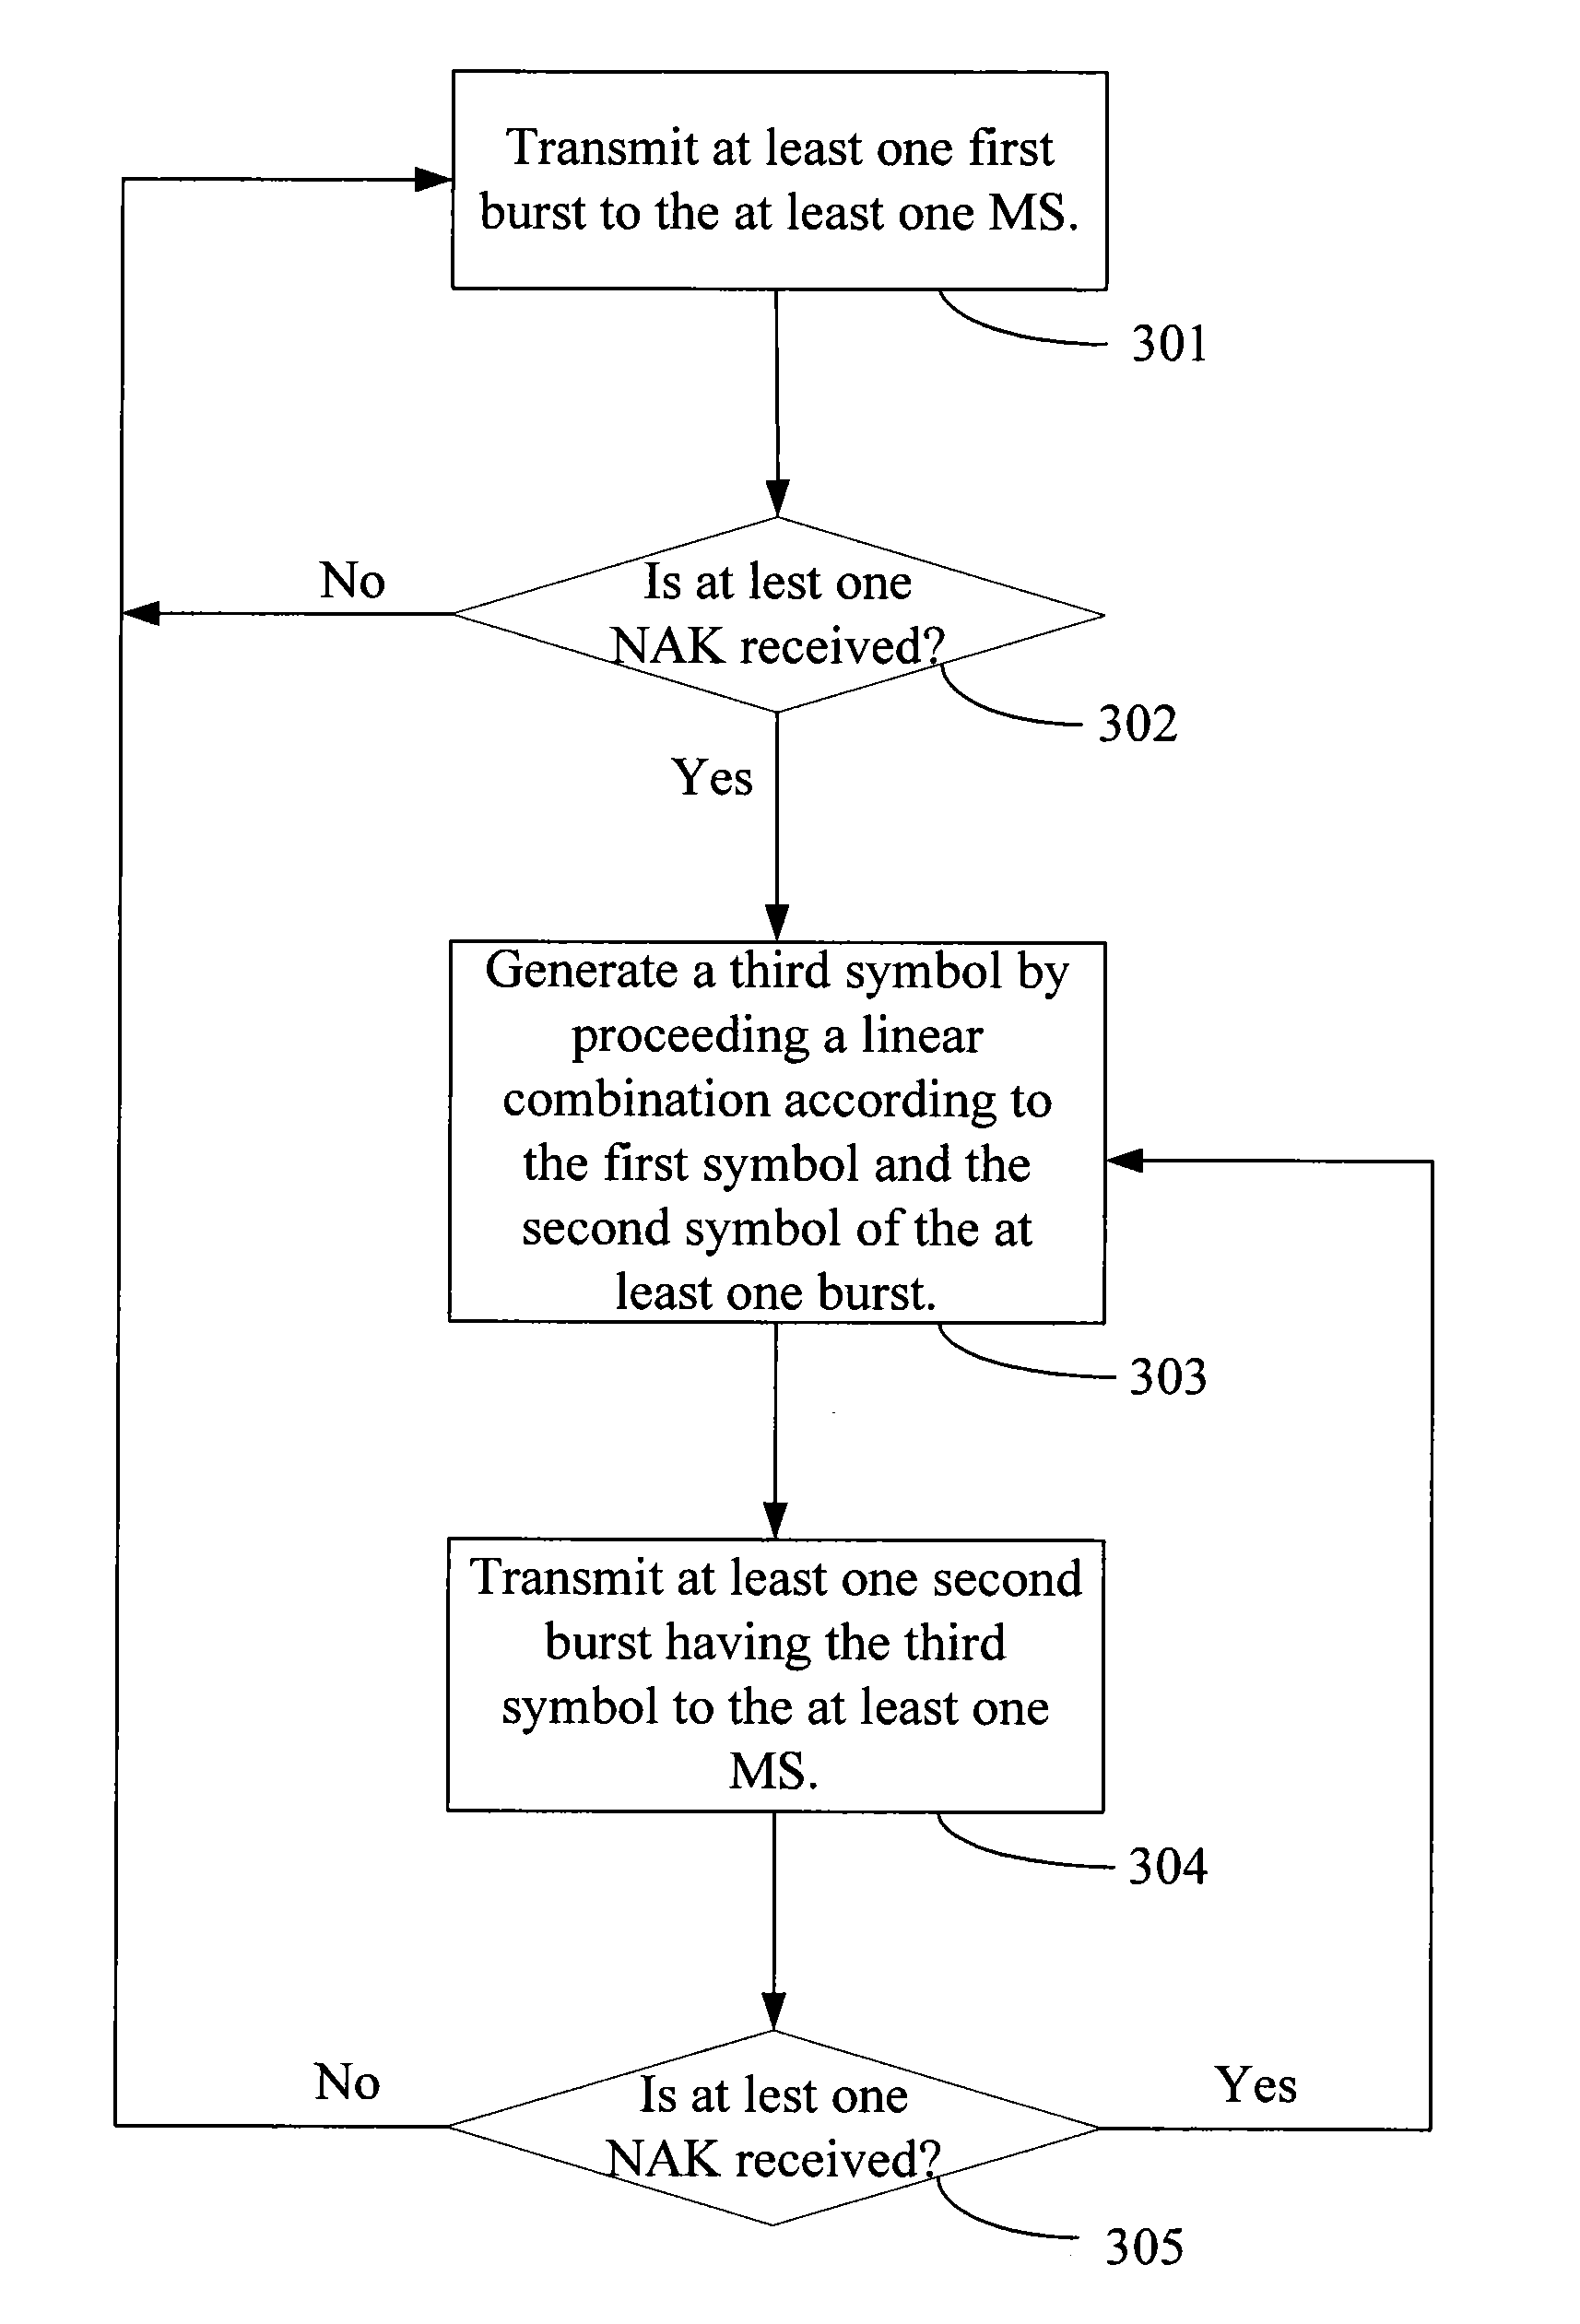 Communication apparatuses, transmission method, receiving method of a wireless network system for hybrid automatic repeat request and tangible machine-readable medium thereof